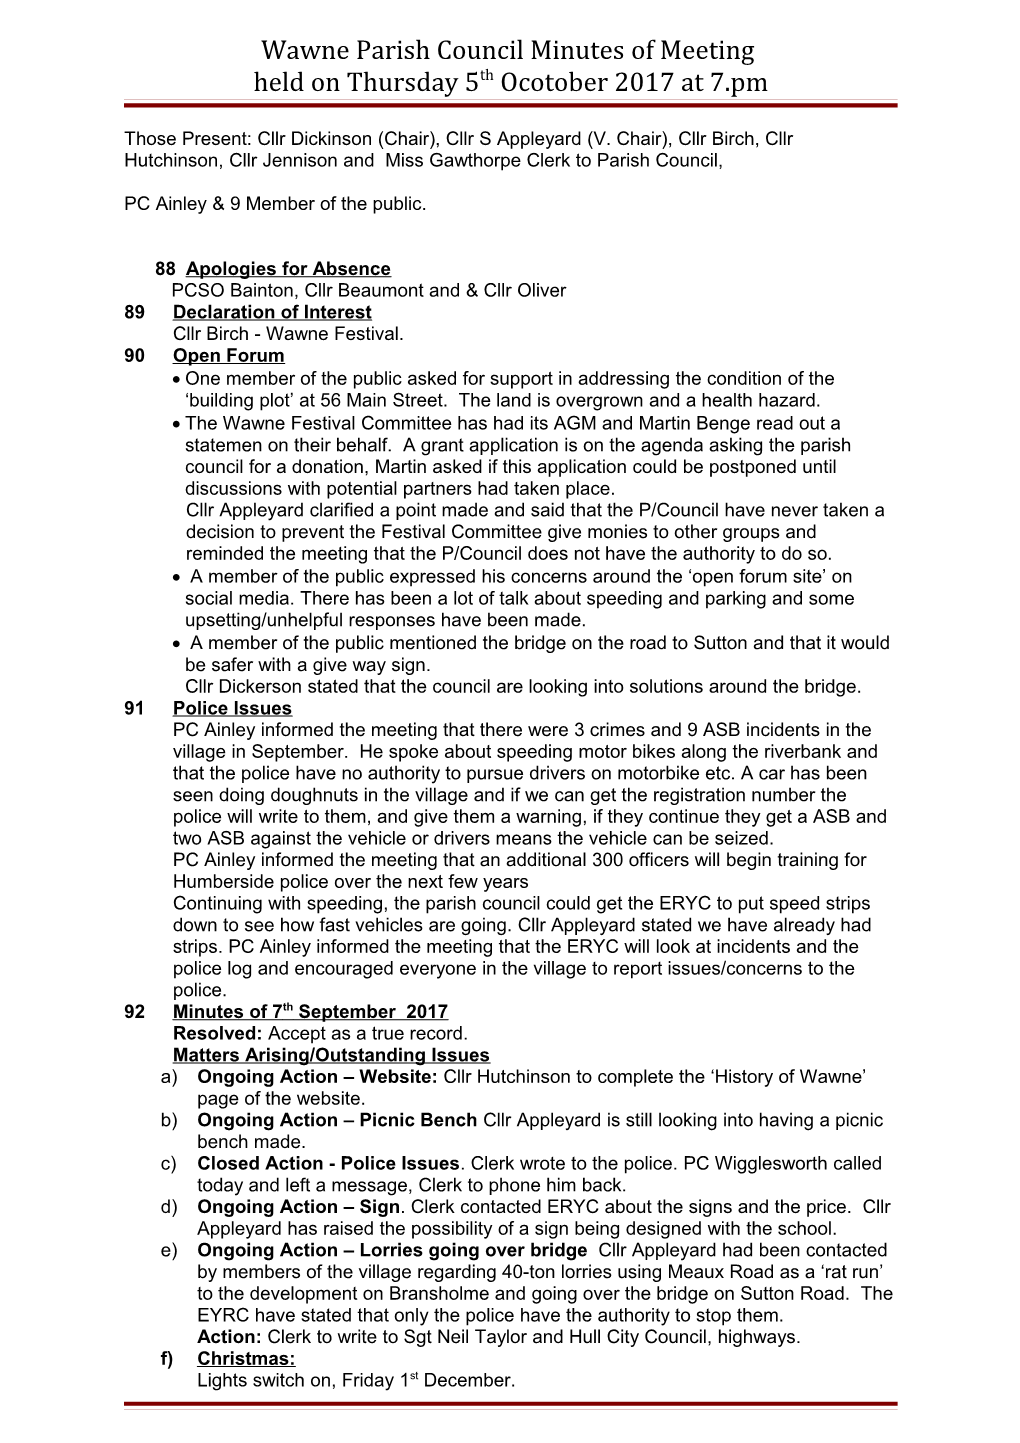 Wawne Parish Council Minutes of Meeting Held on Thursday 1St October 2009 at 7.Pm